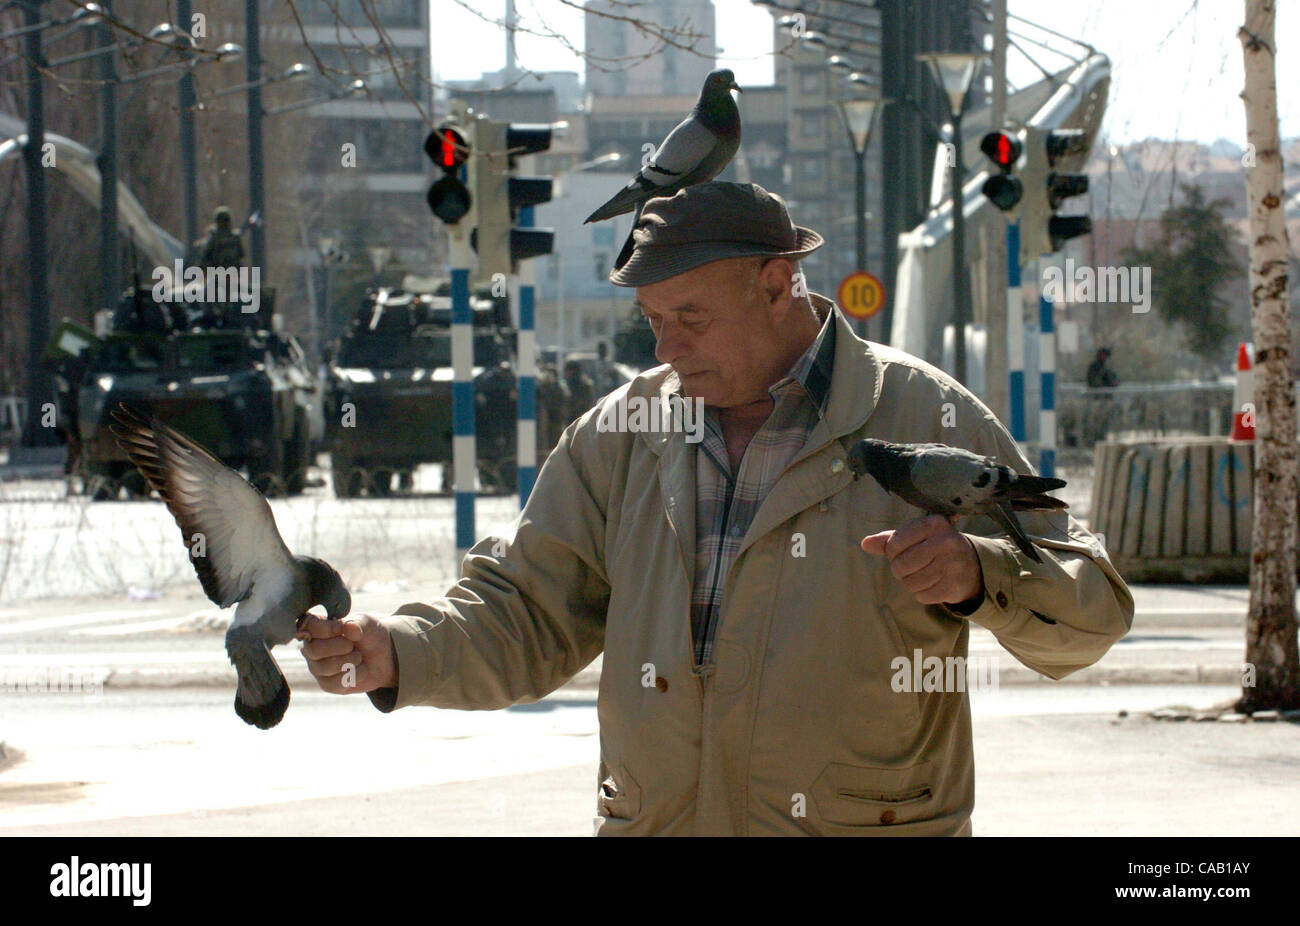 Mar 22, 2004; Kosovo, SERBIA; An old Serb man feeds the pigeoens nar the bridge in Kosovska Mitrovica, near the bridge that divides this troubled city into North (controlled by Serbs) and South (controlled by Albanians). The bridge is blocked with KFOR troops and armoured vehicles to prevent both si Stock Photo